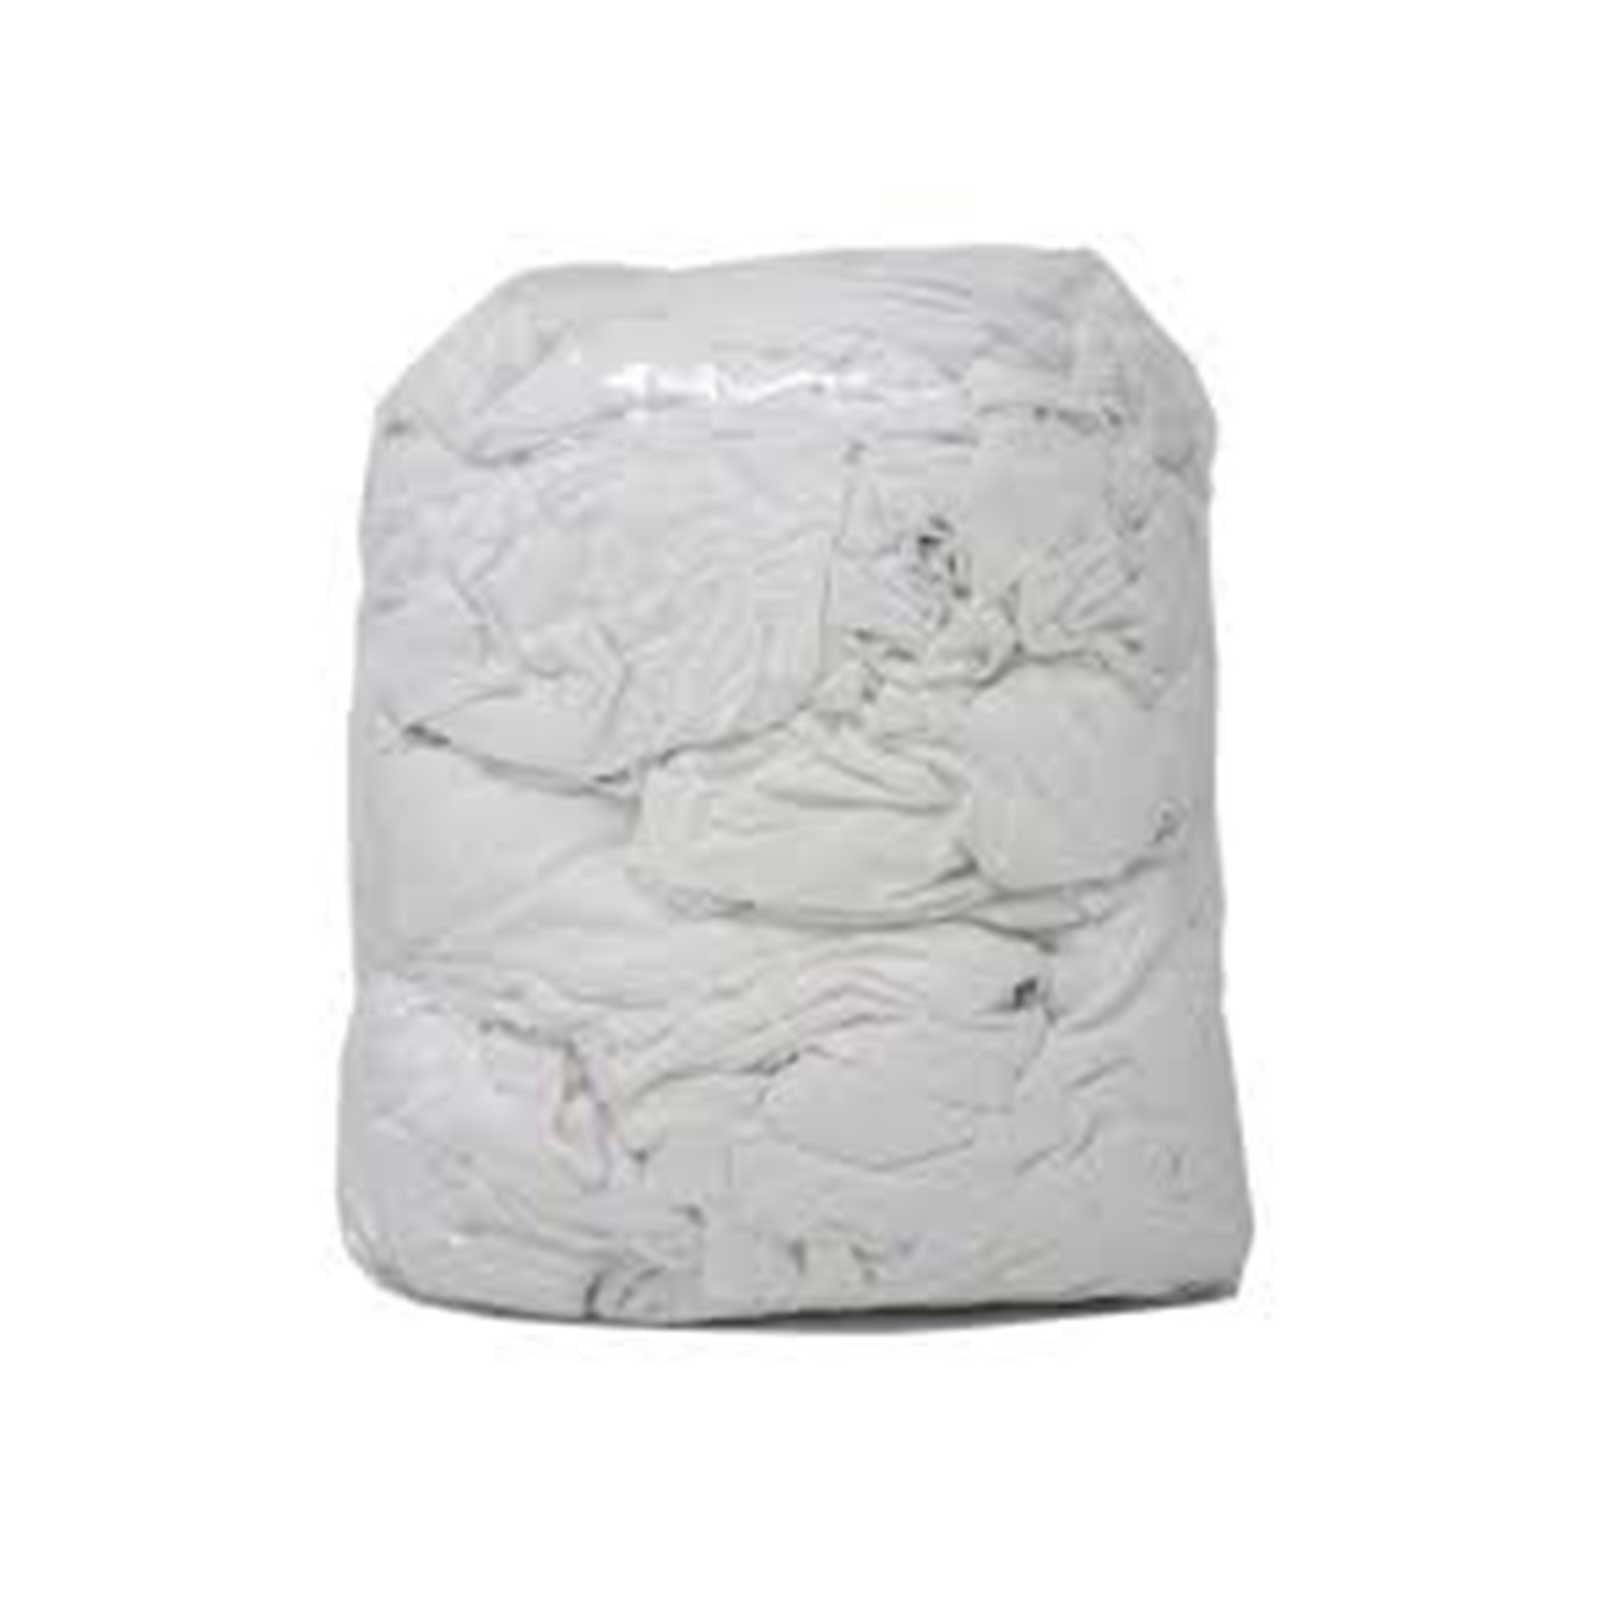 White Towel Cleaning Rags 5 kilo